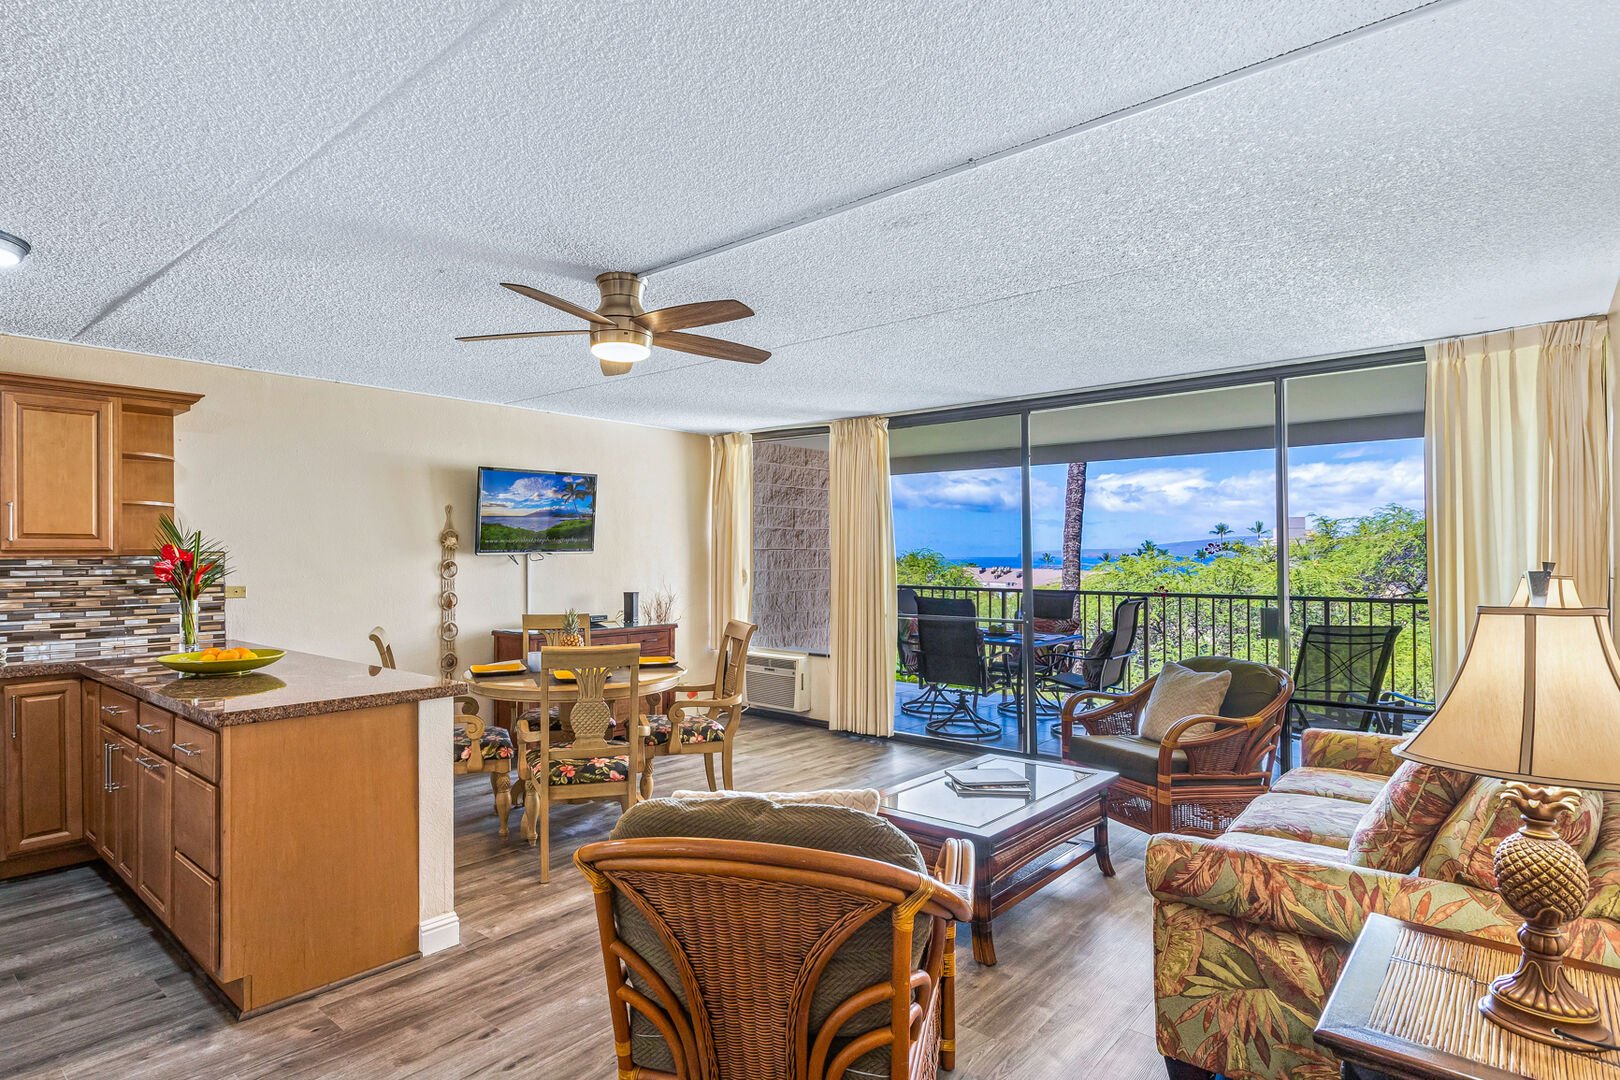 Looking for Hawai’i’s Very Best Vacation Rentals? Look No Further!